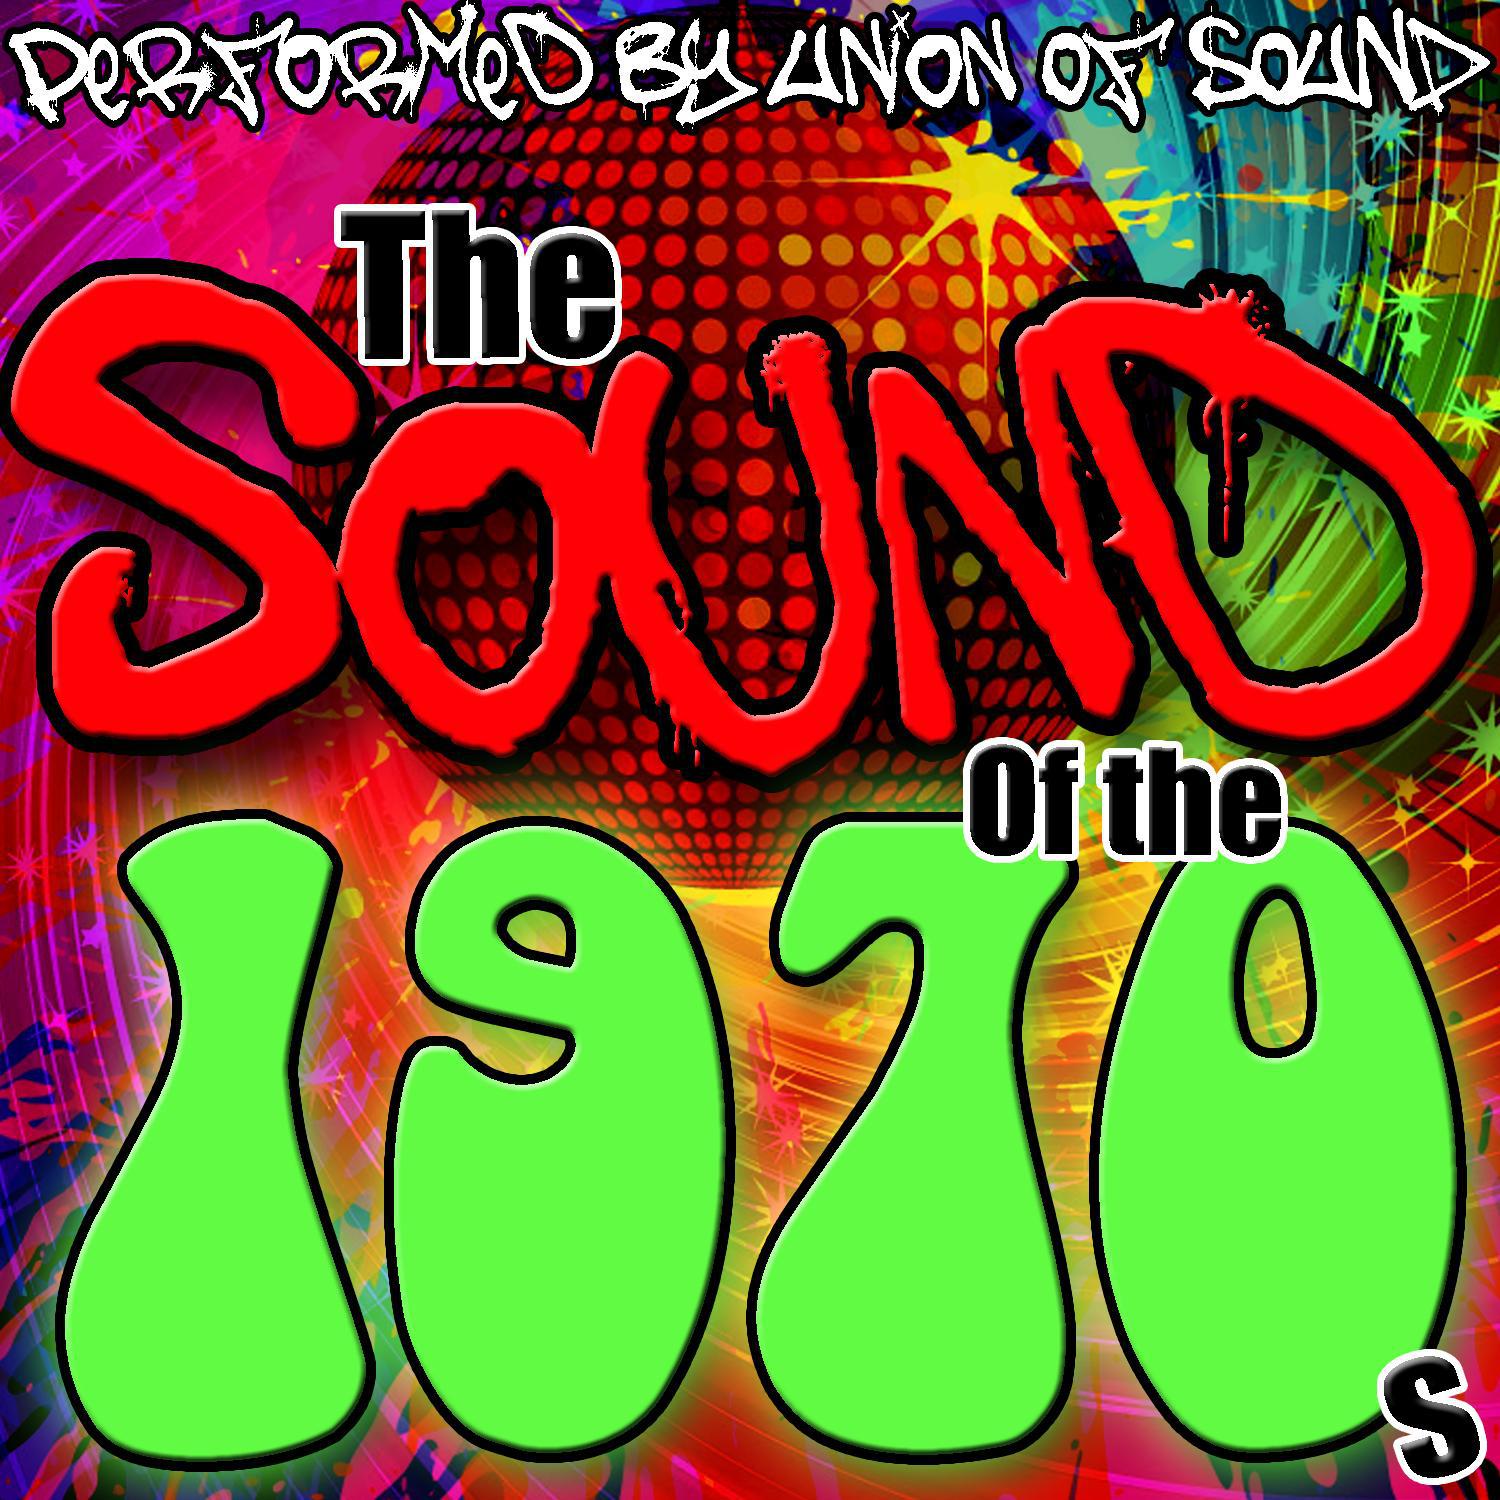 The Sound of the 1970s